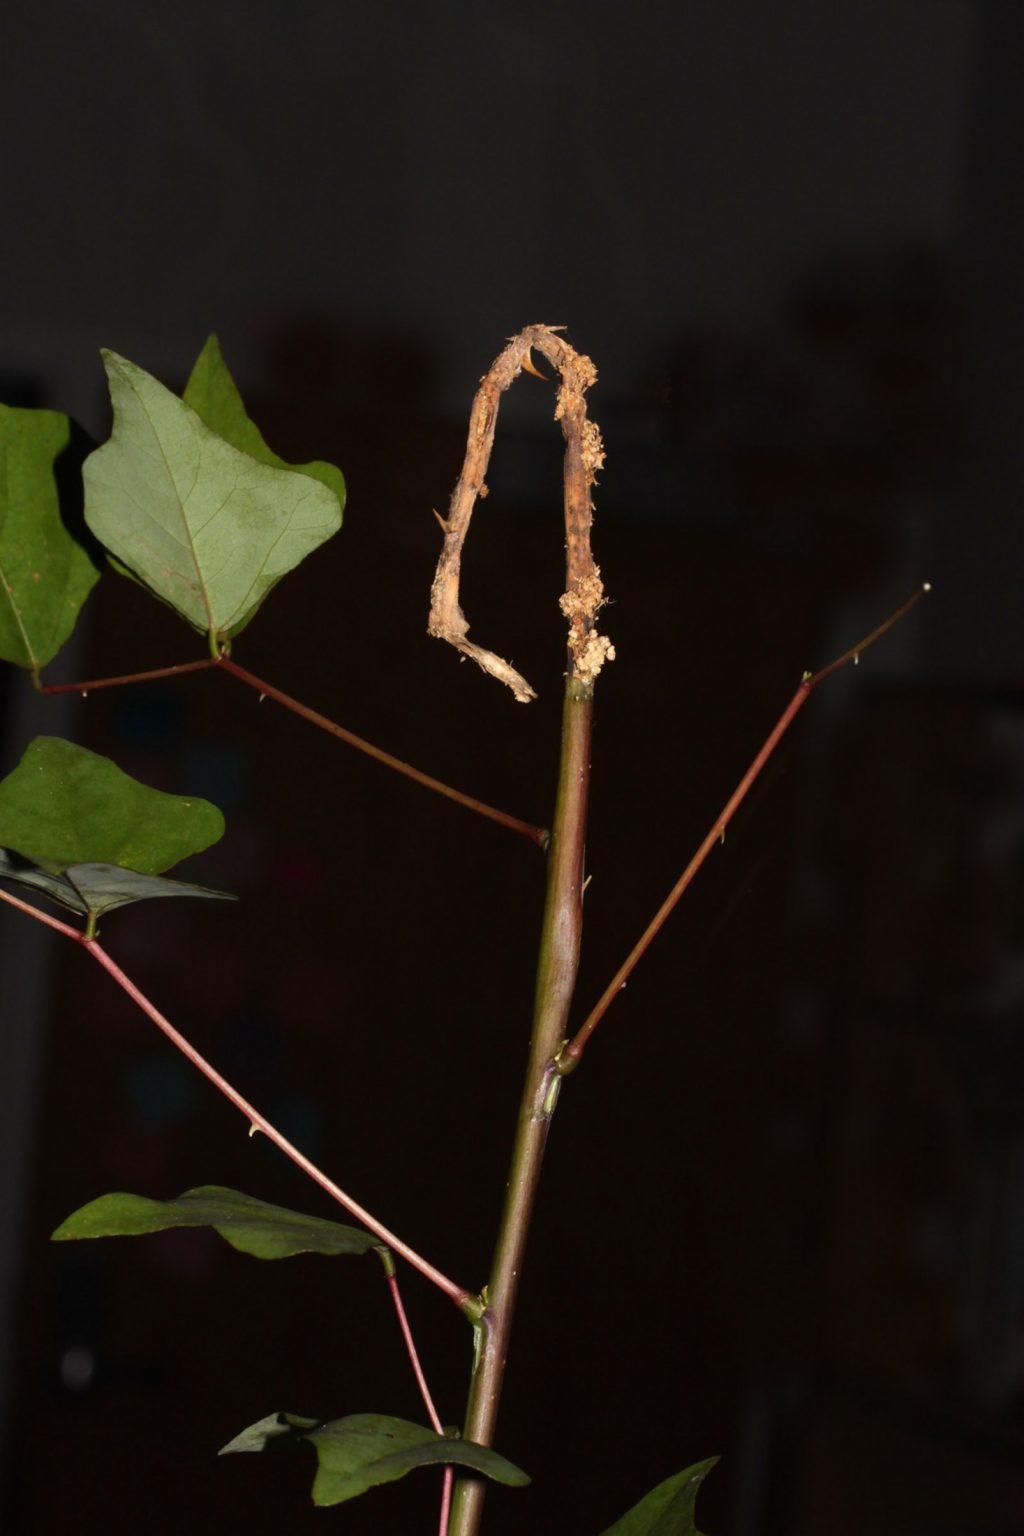 Wilted stem from insect damage